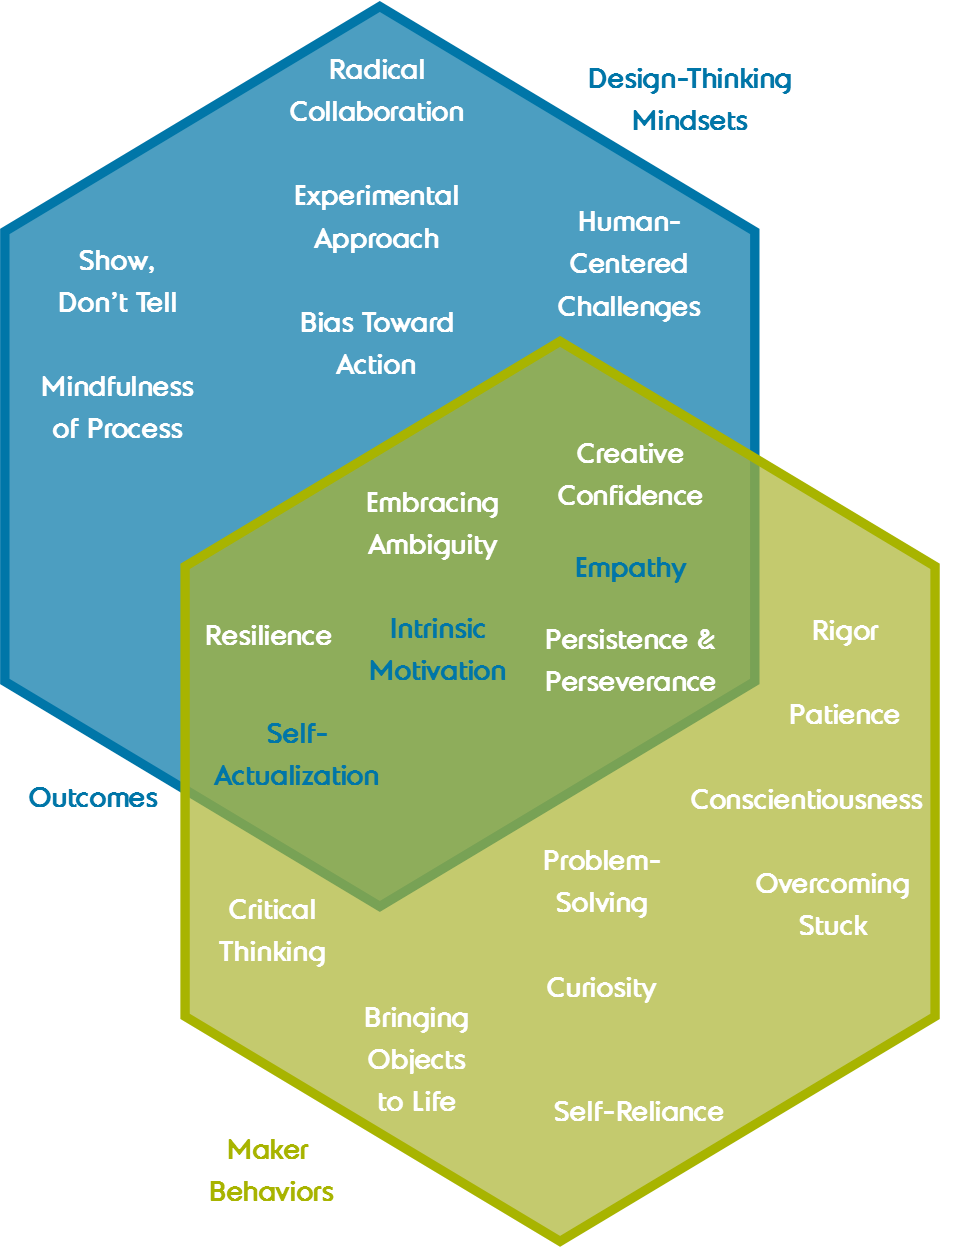 Design thinking mindsets and outcomes